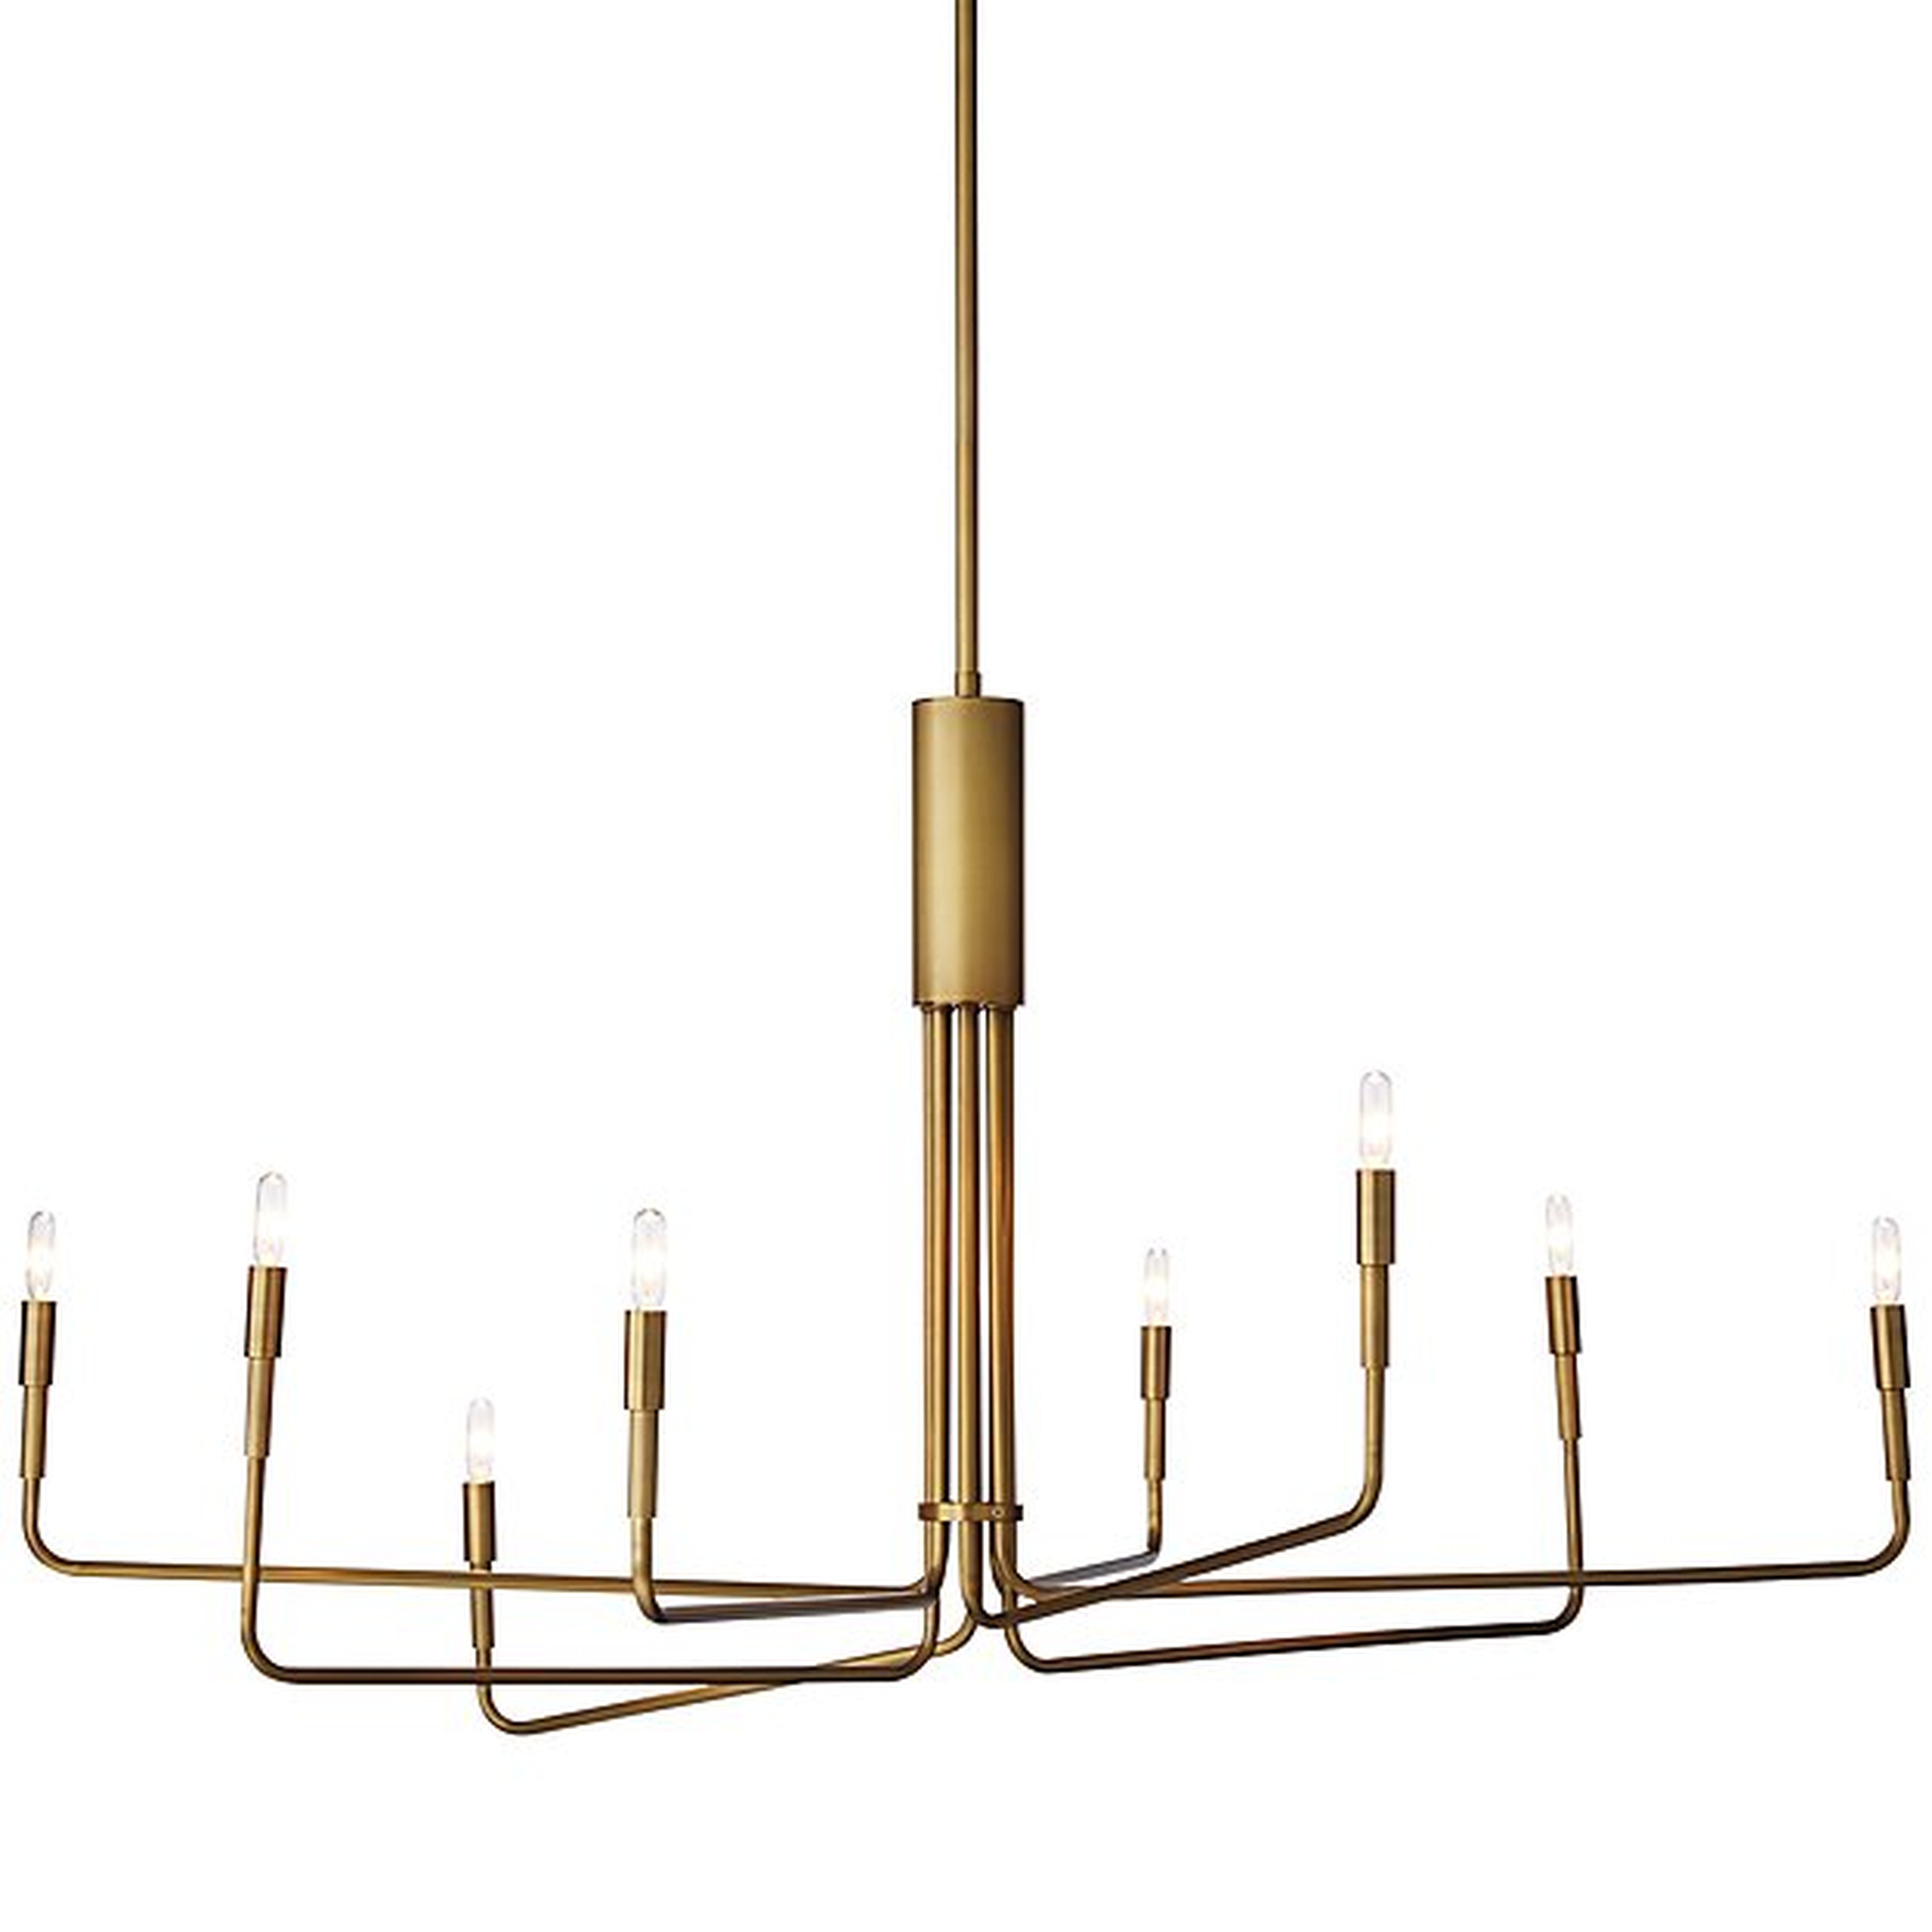 Clive Large Brass Chandelier - 8 Arm - Crate and Barrel